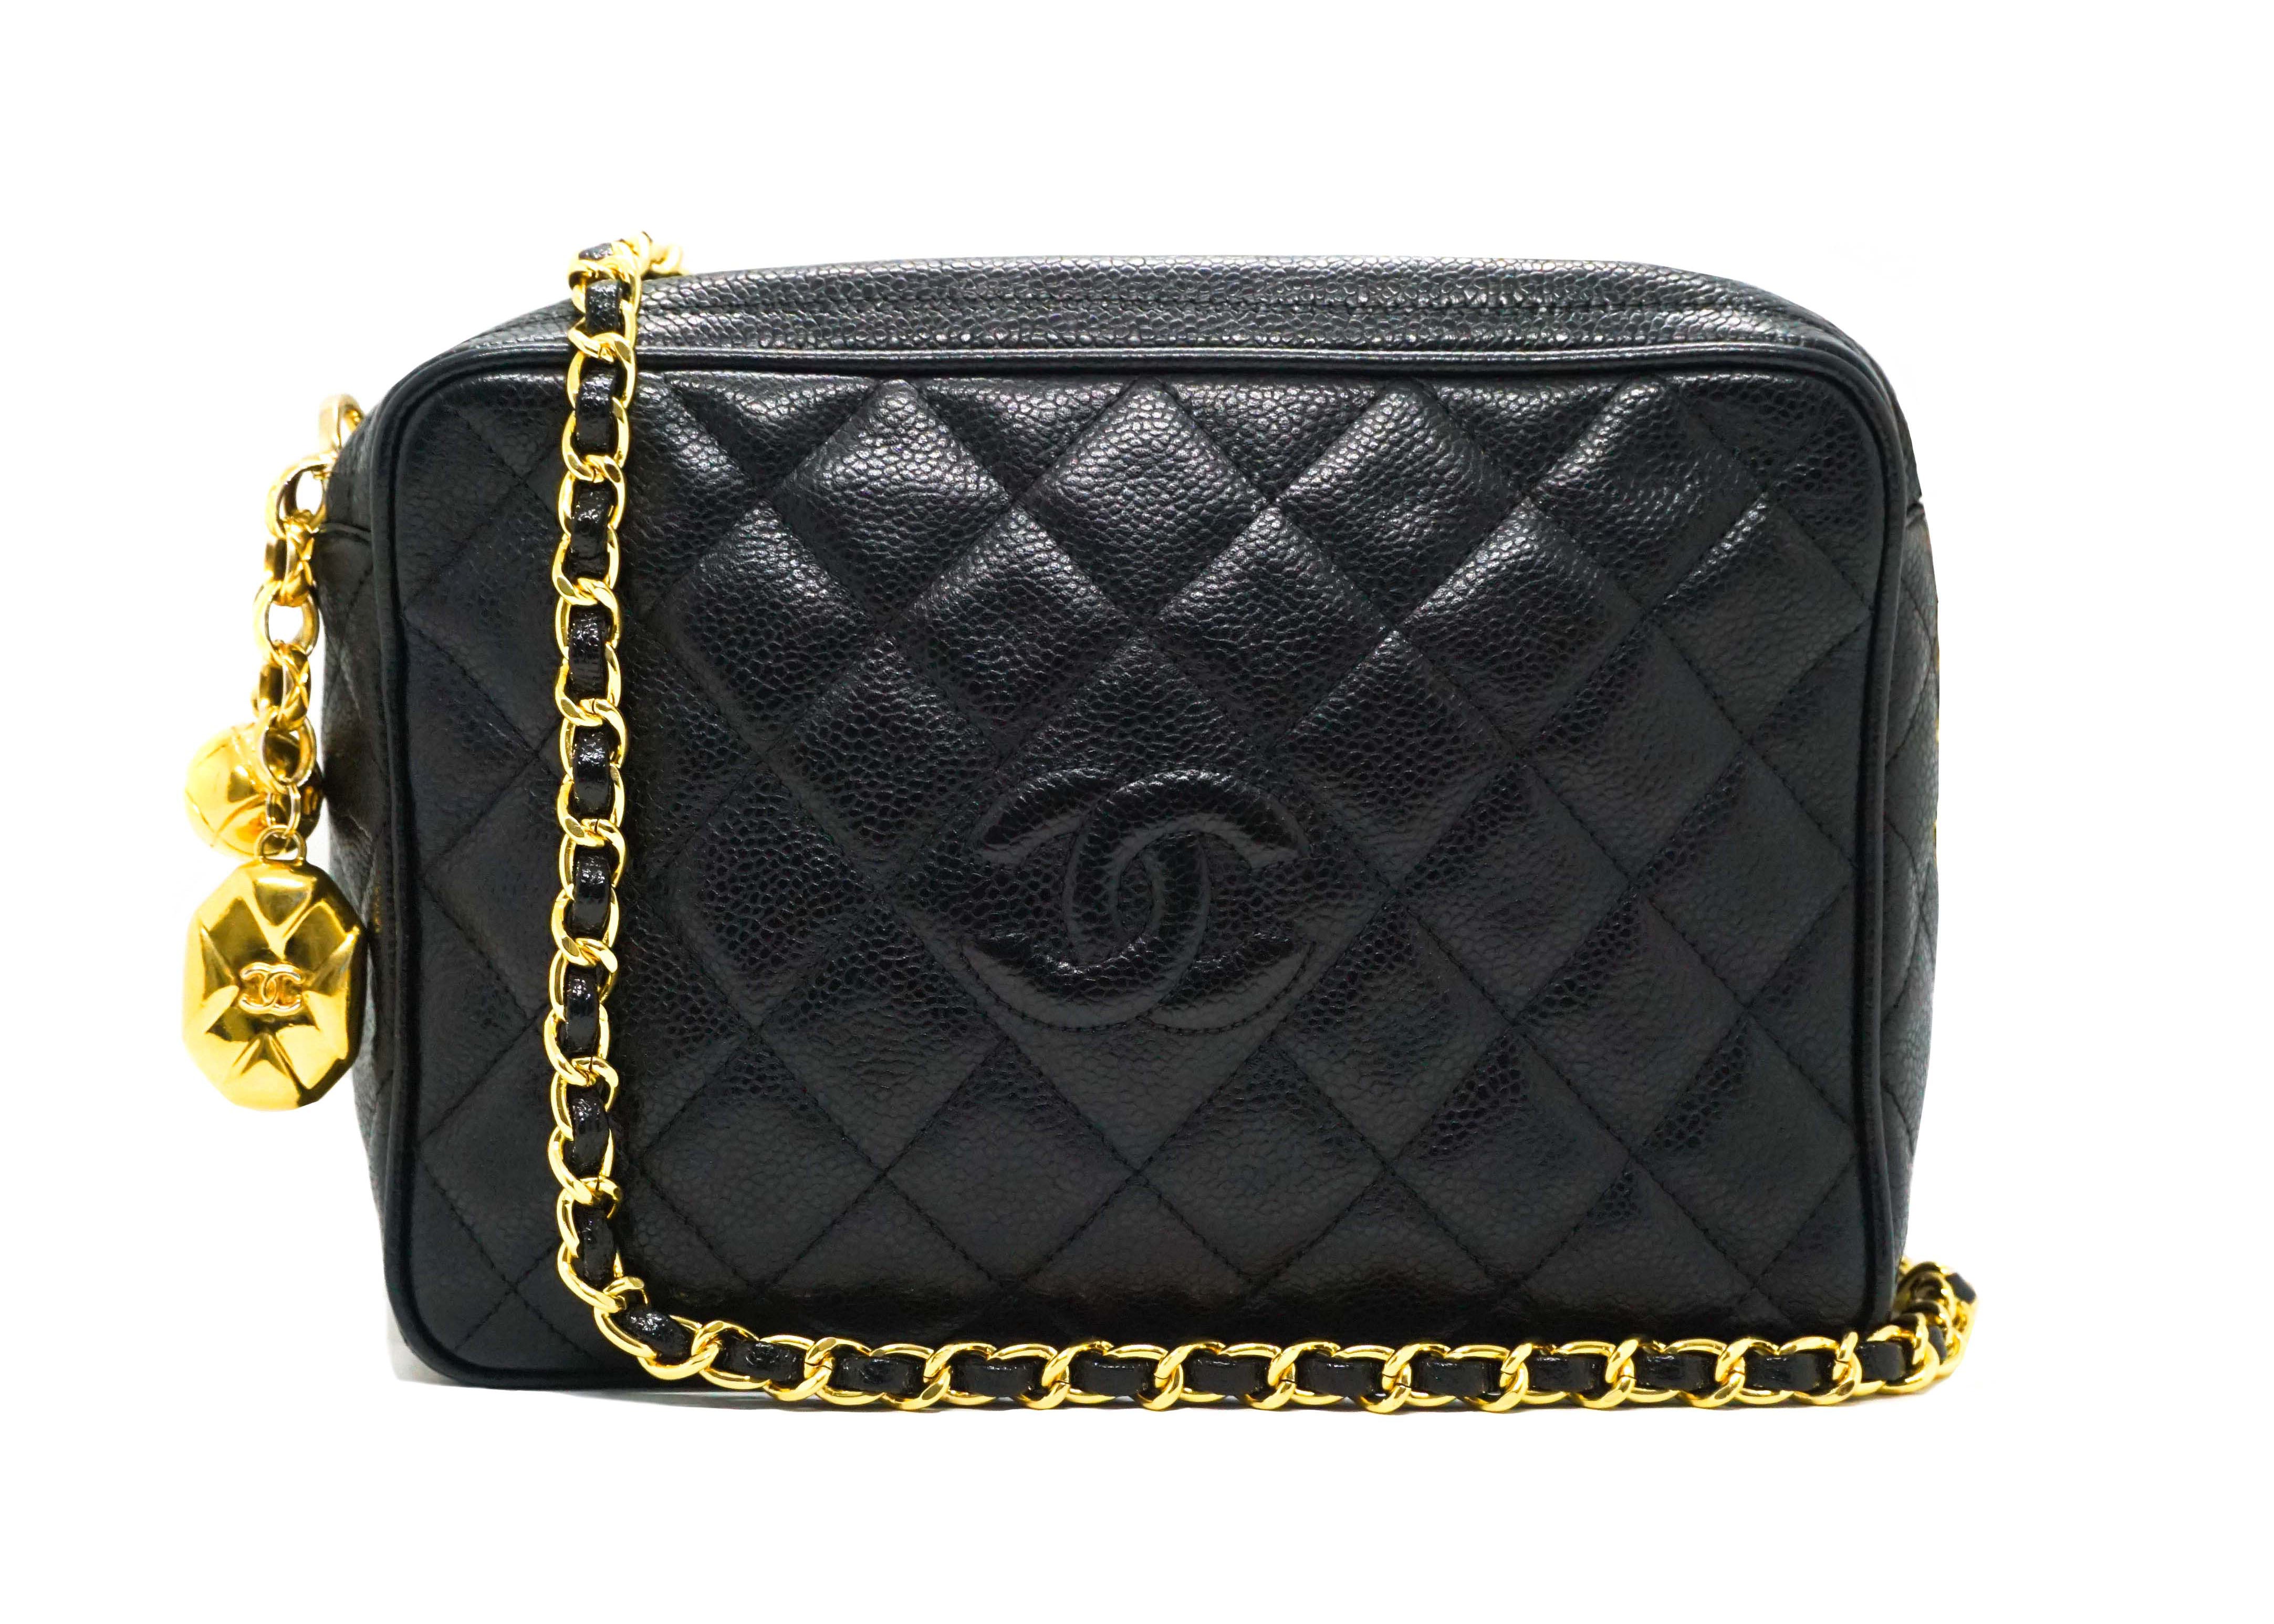 Chanel Vintage Chanel Black Caviar Quilted Leather Waist Pouch Gold